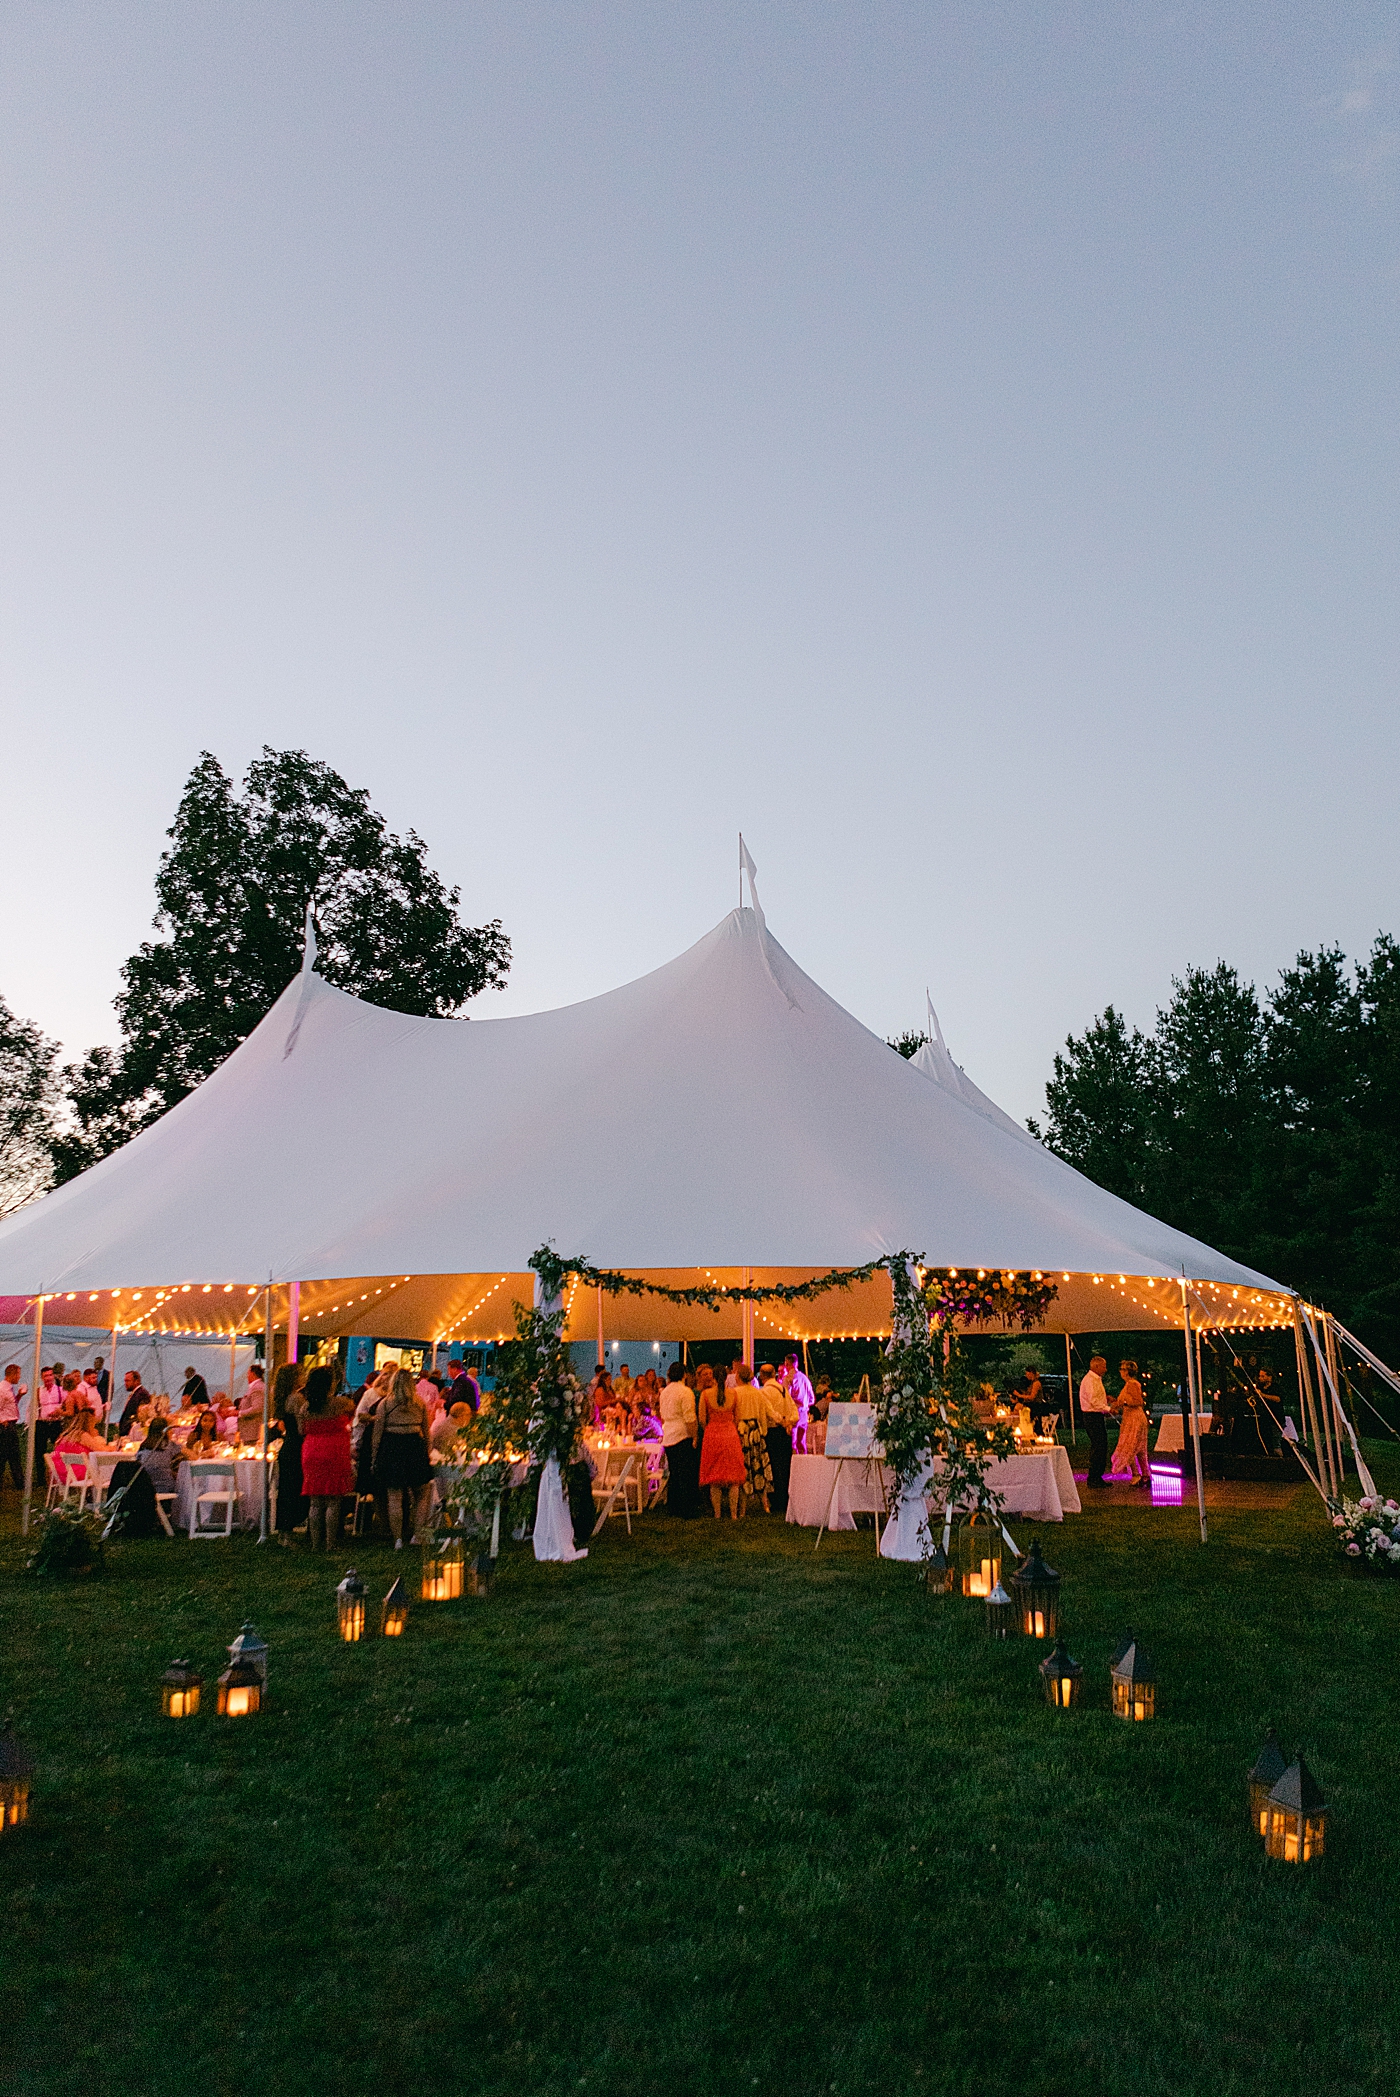 Tented wedding reception at dusk | Image by Hope Helmuth Photography